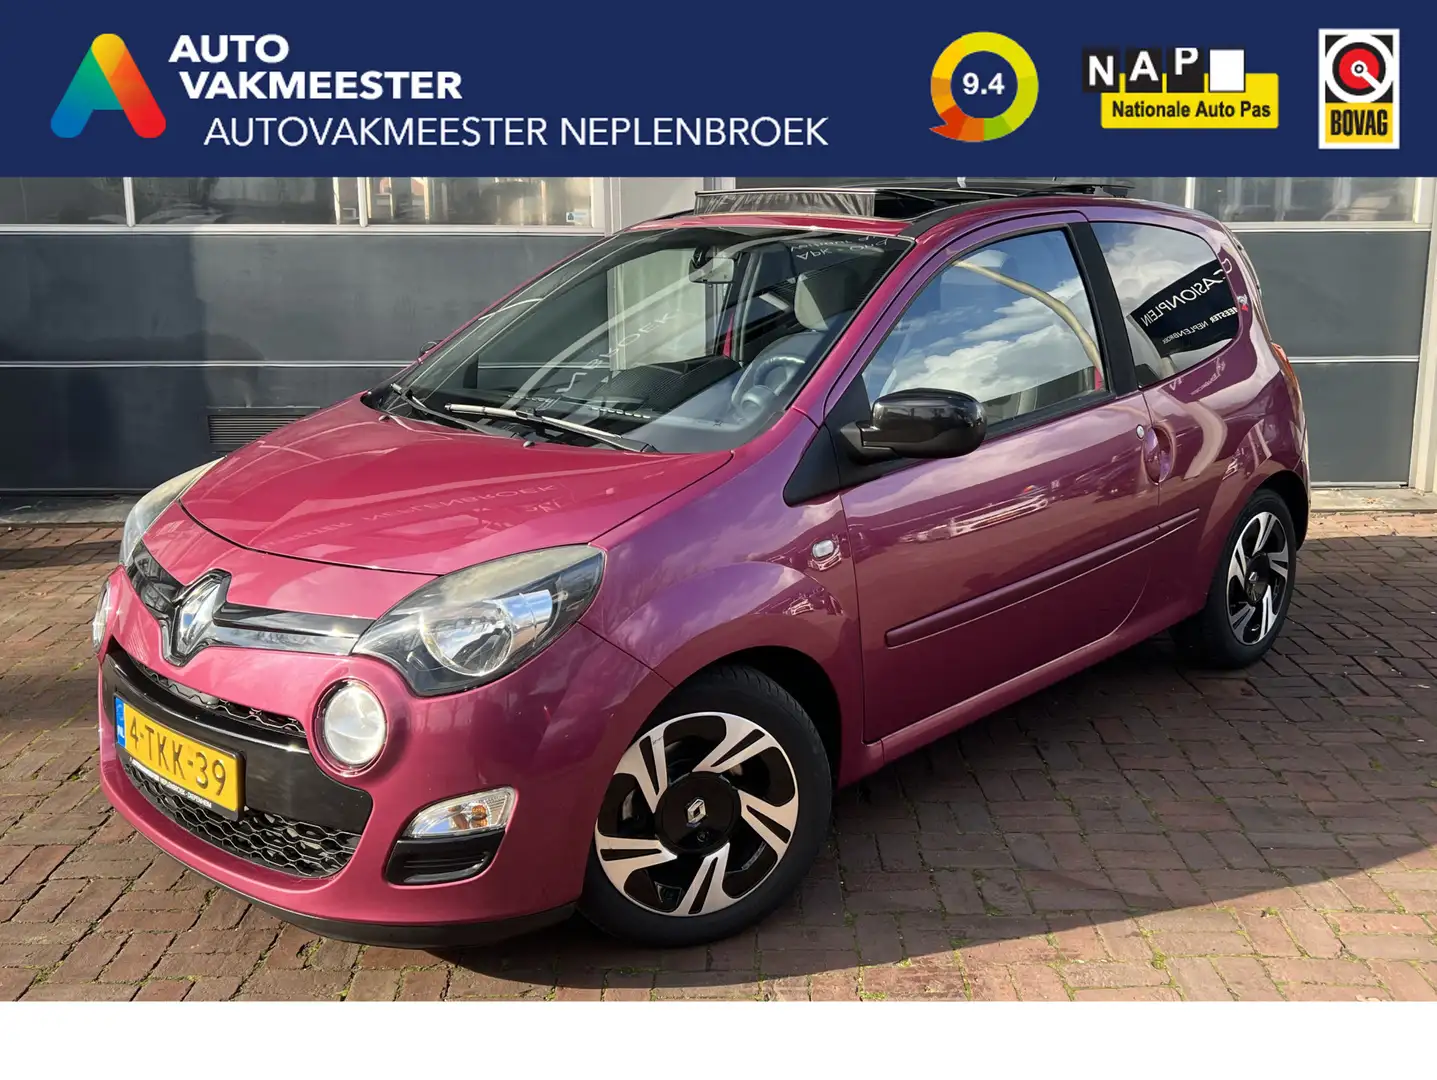 Renault Twingo 1.2 16V Dynamique Bj 2014 km 113.000 Airco,14Inch Paars - 1